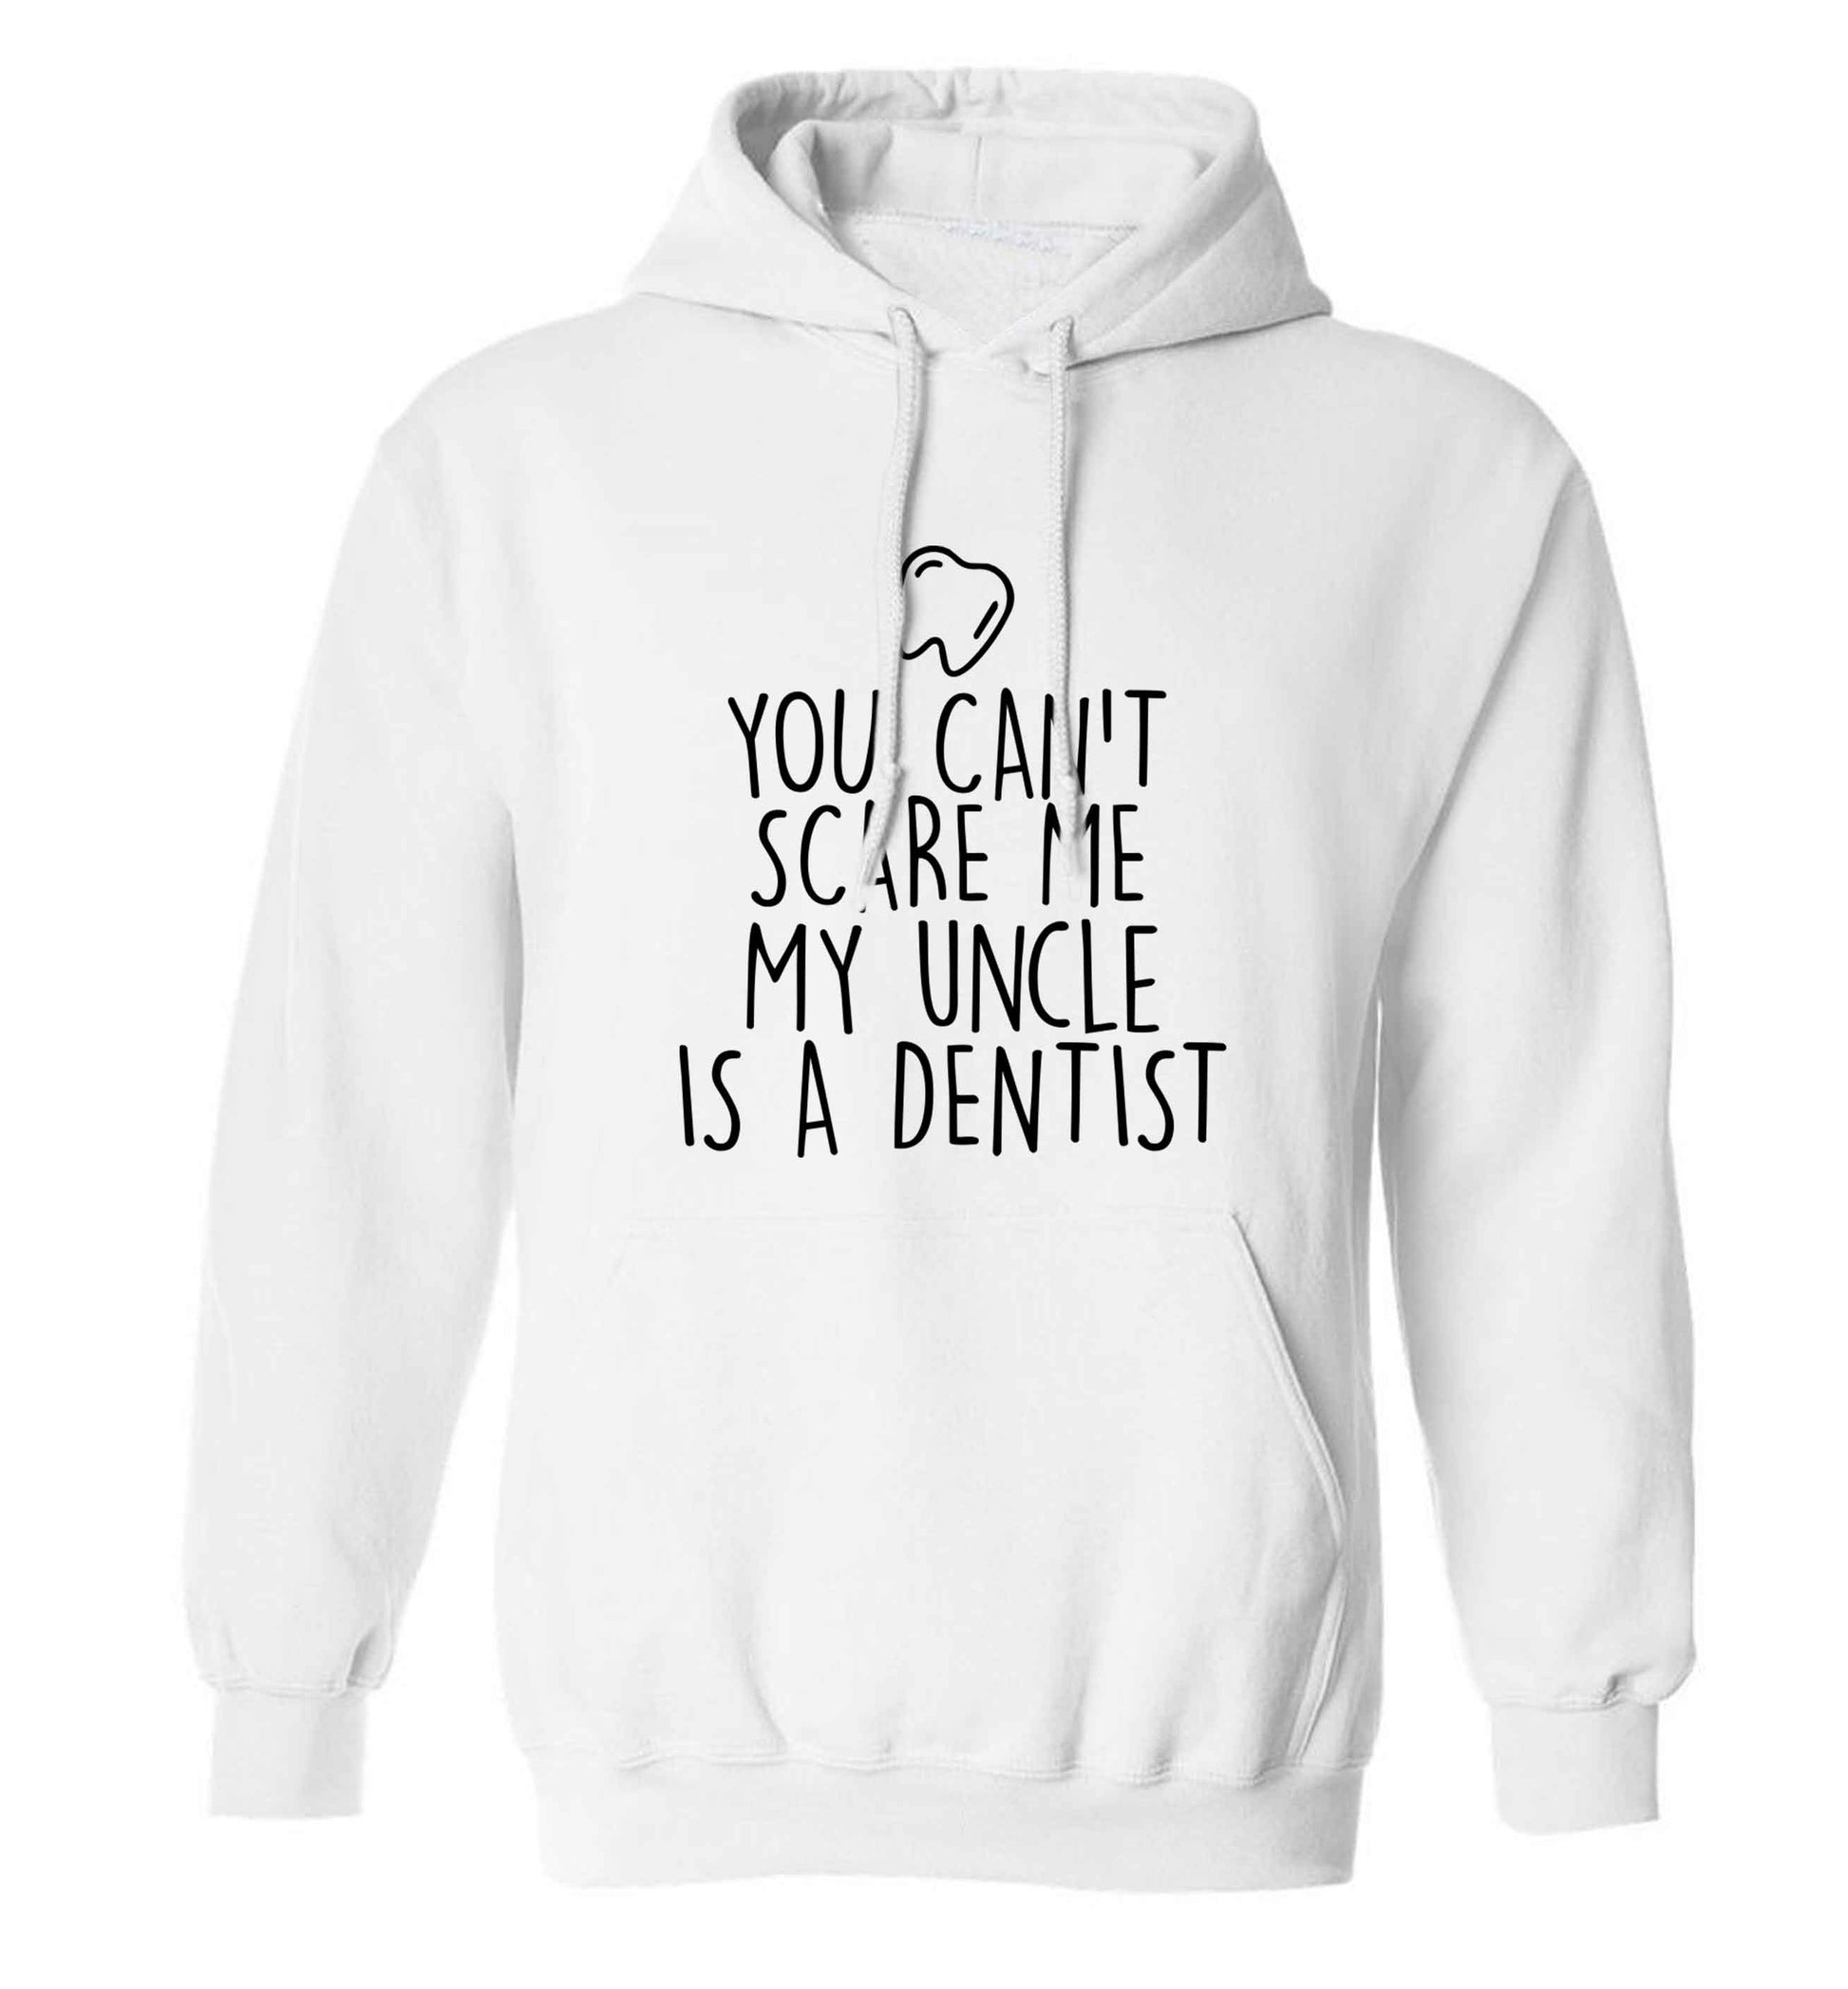 You can't scare me my uncle is a dentist adults unisex white hoodie 2XL